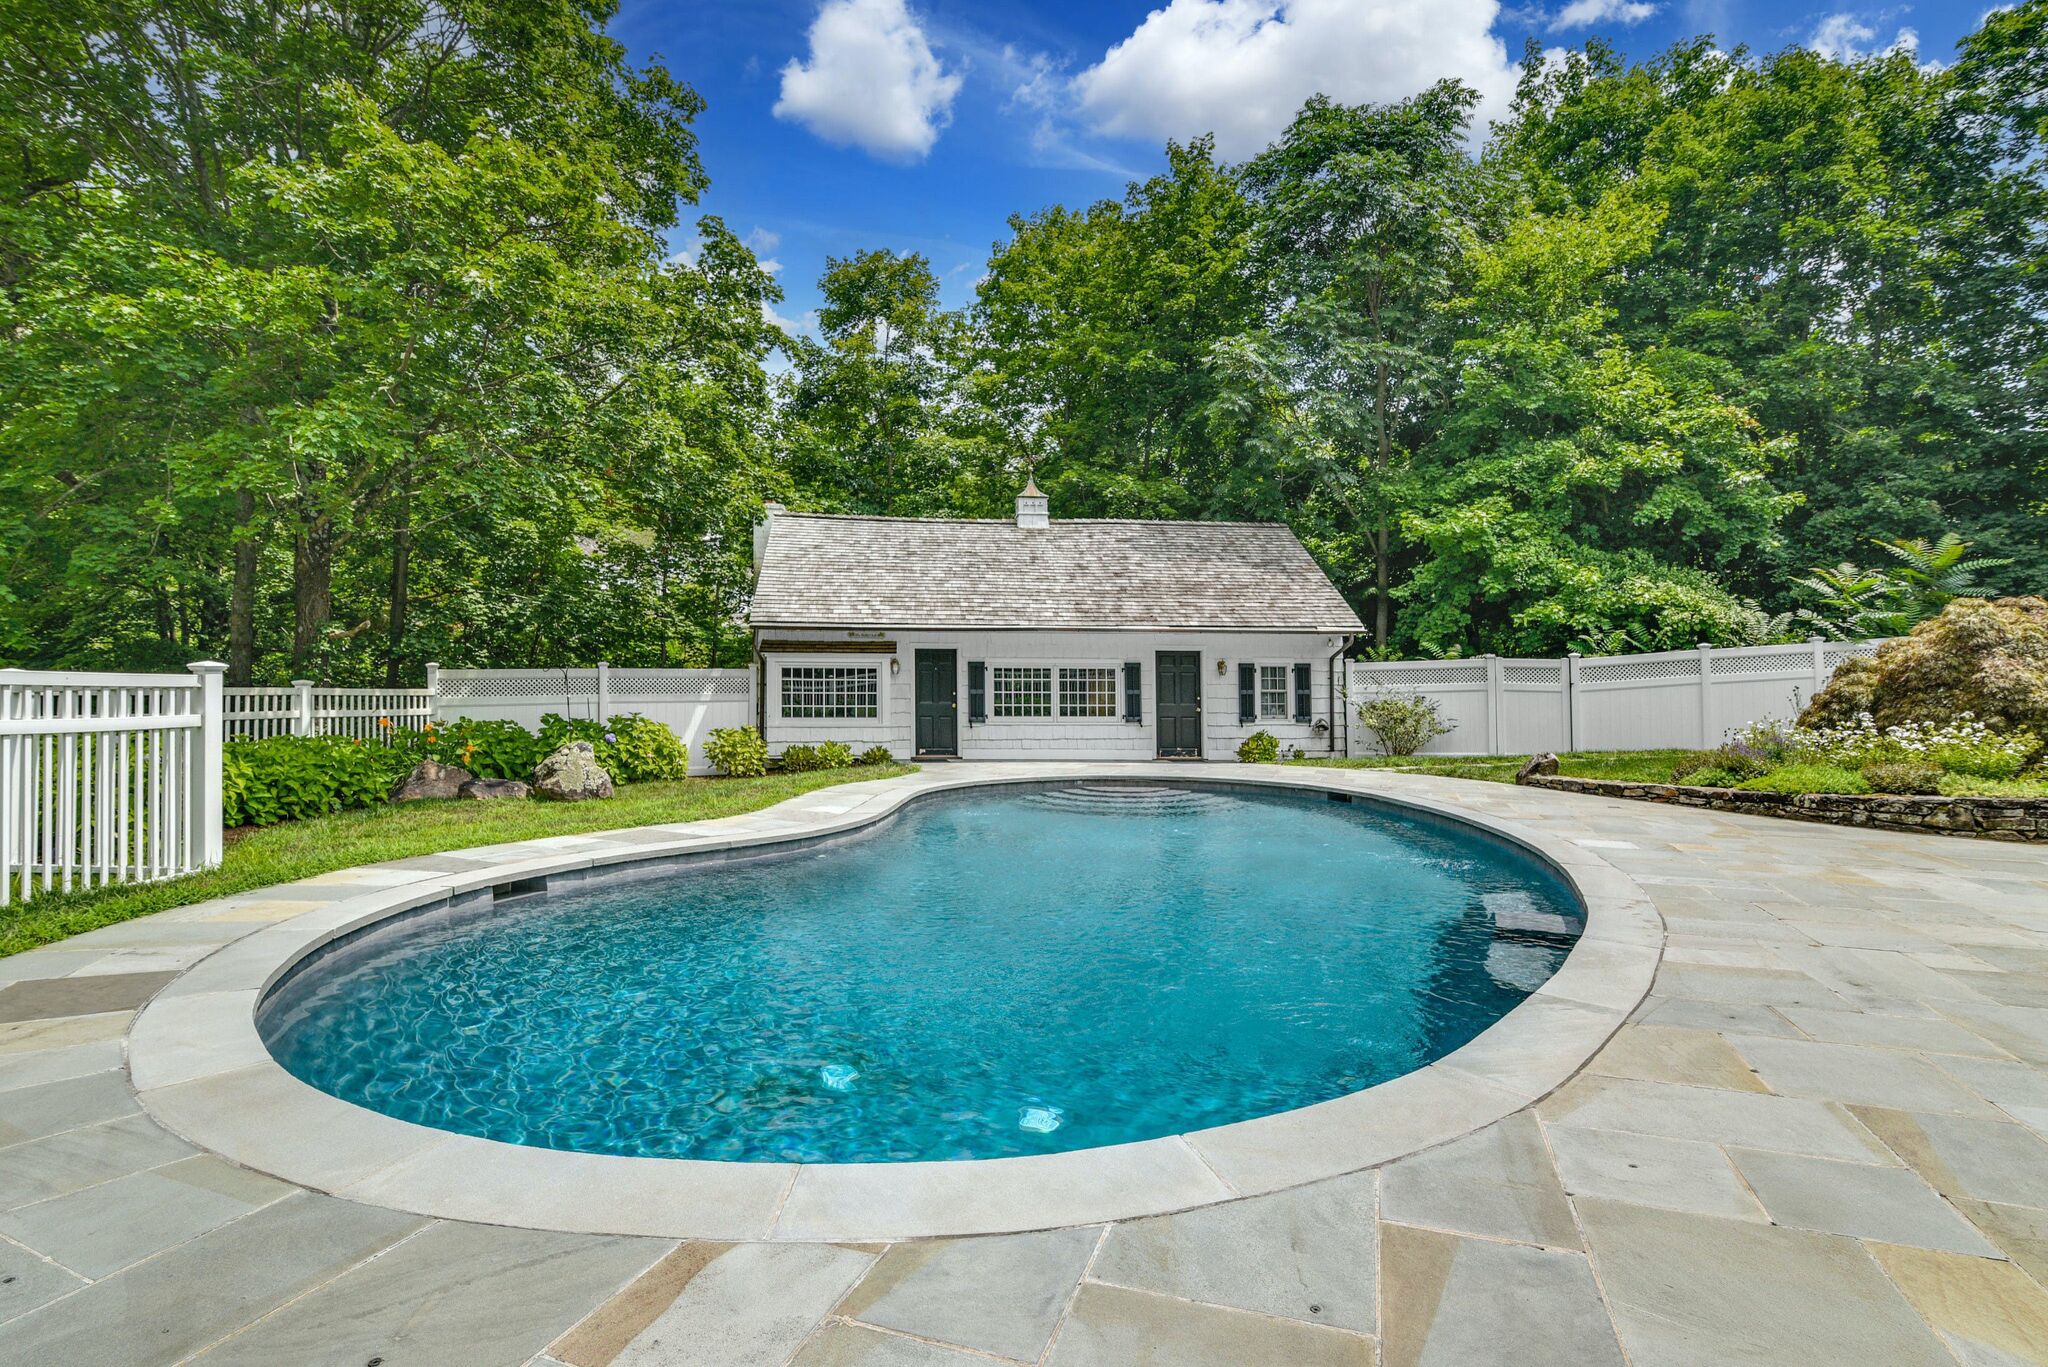 What to know about installing a pool in CT, from permits to decks